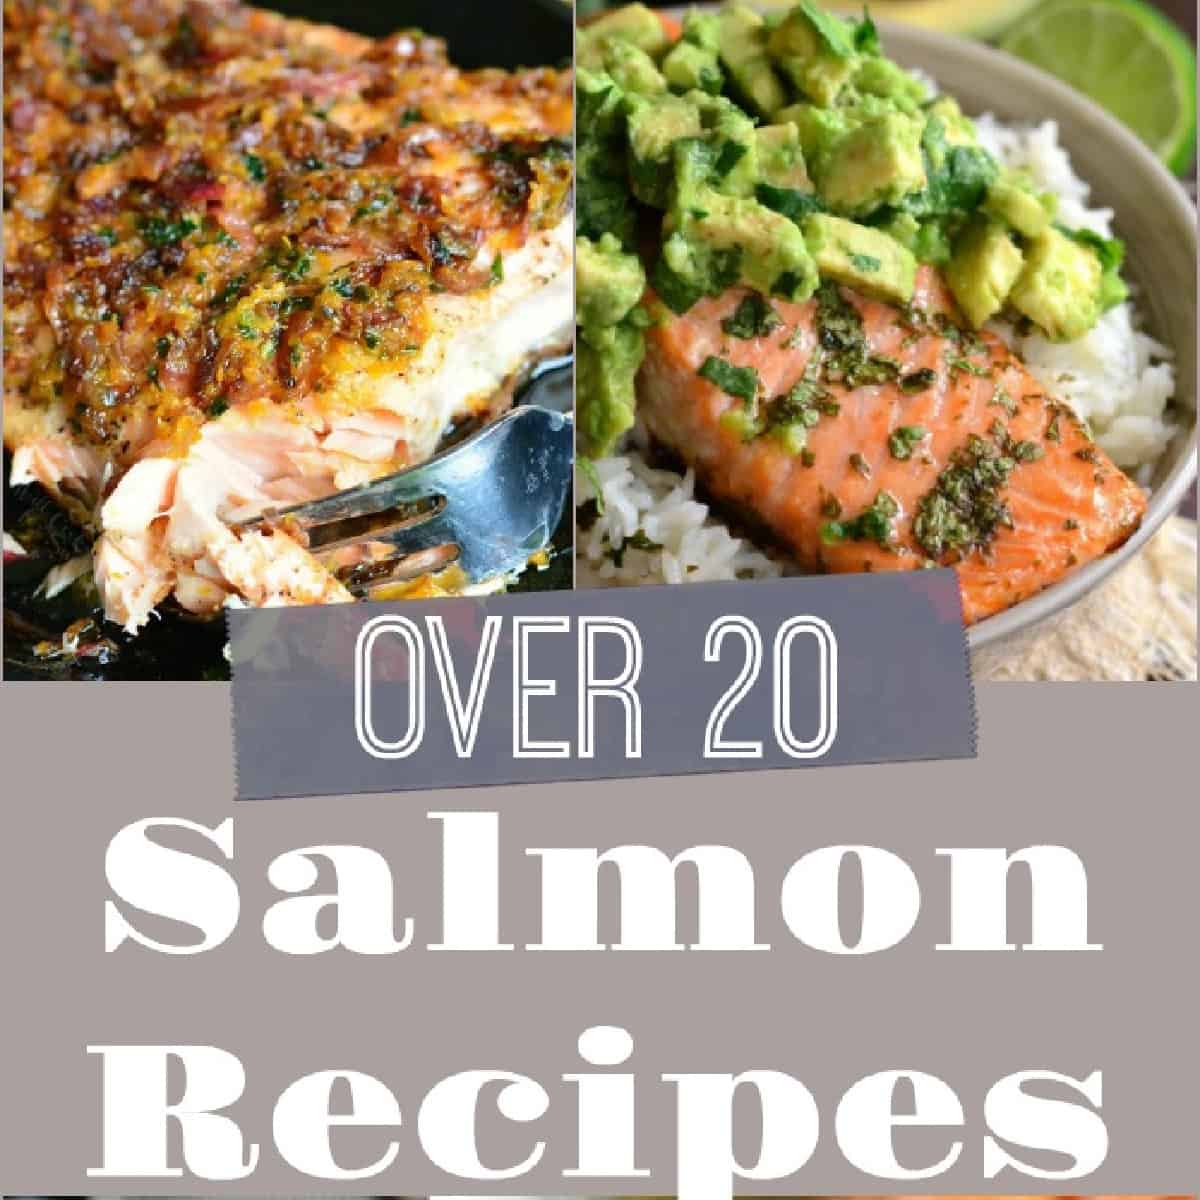 Salmon Recipes - Over 20 Recipes That Take 30 Minutes or Less